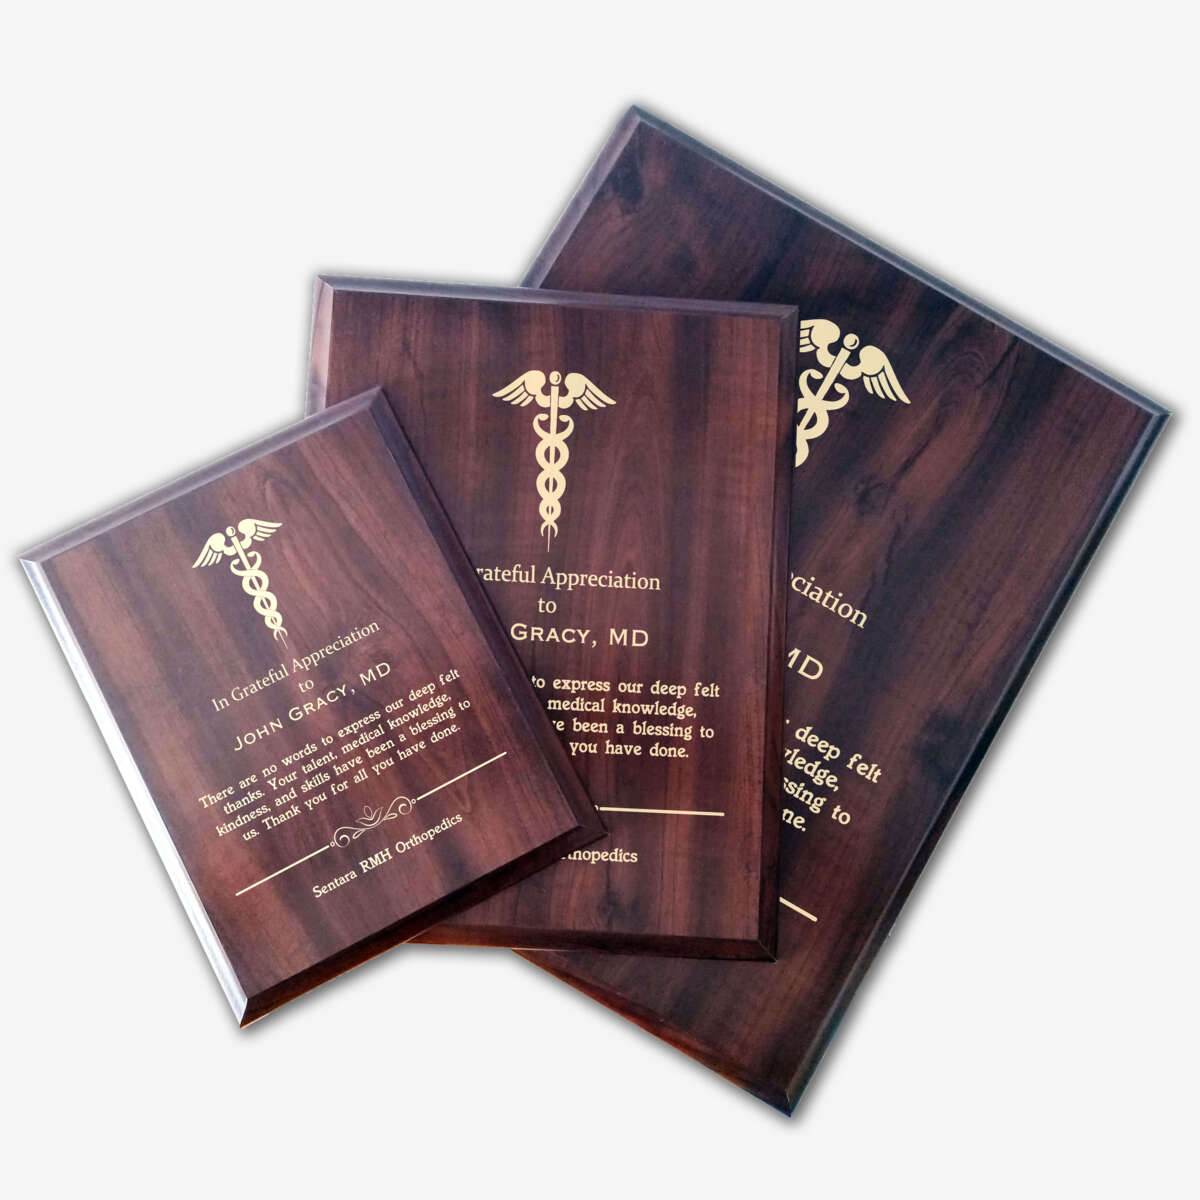 Photo of different sizes of the plaque spread out.